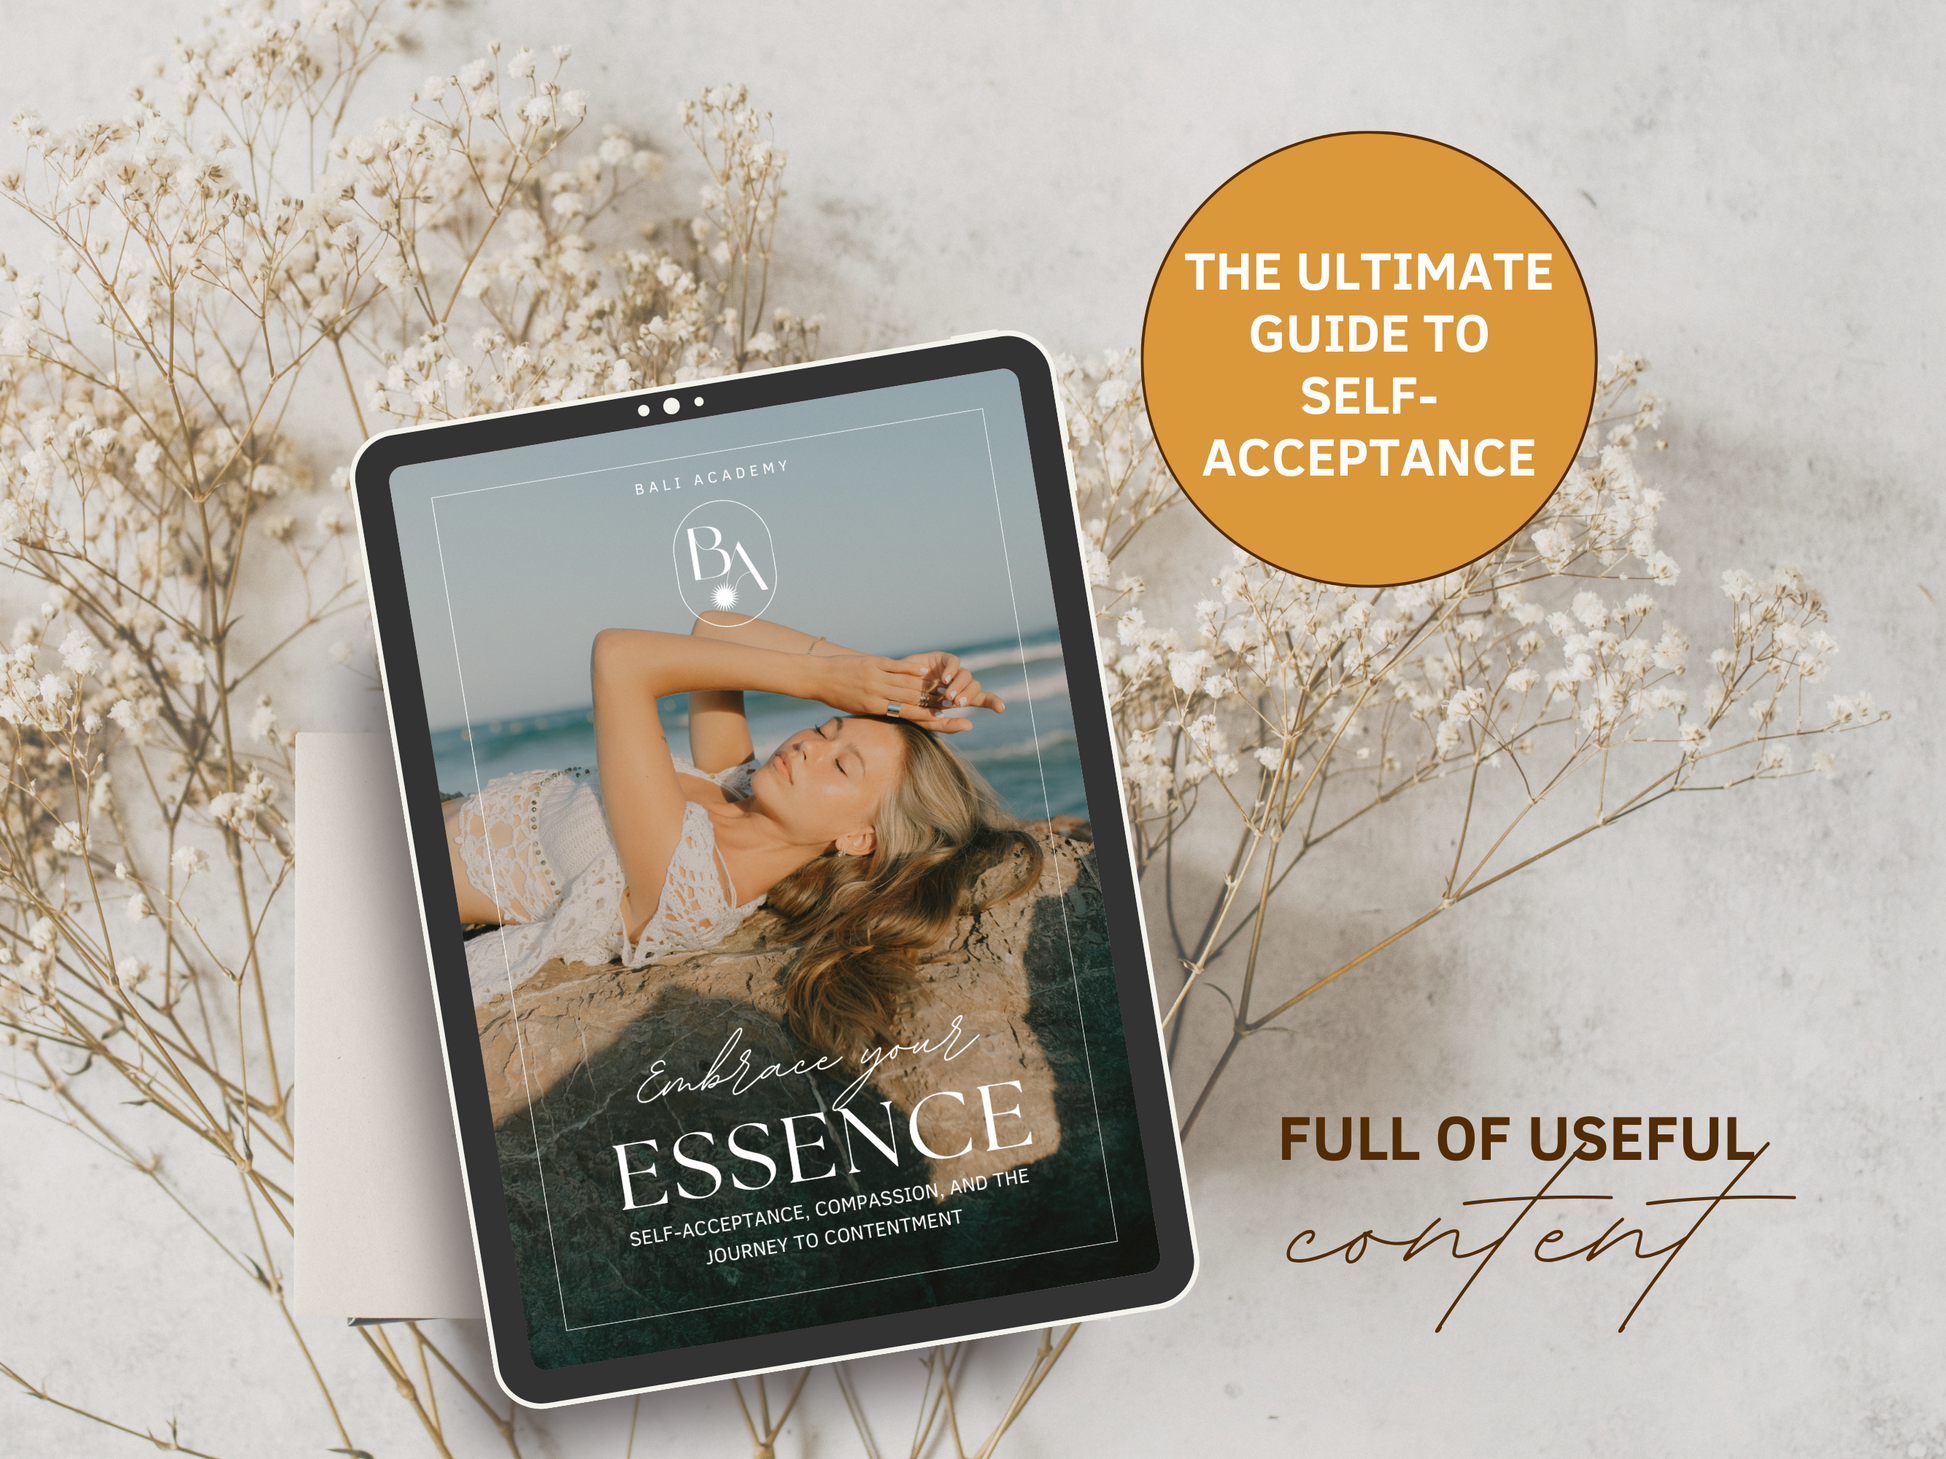 Embrace Your Essence PLR eBook & Workbook - The ultimate guide to self-acceptance! It's full of useful content and editable in Canva.